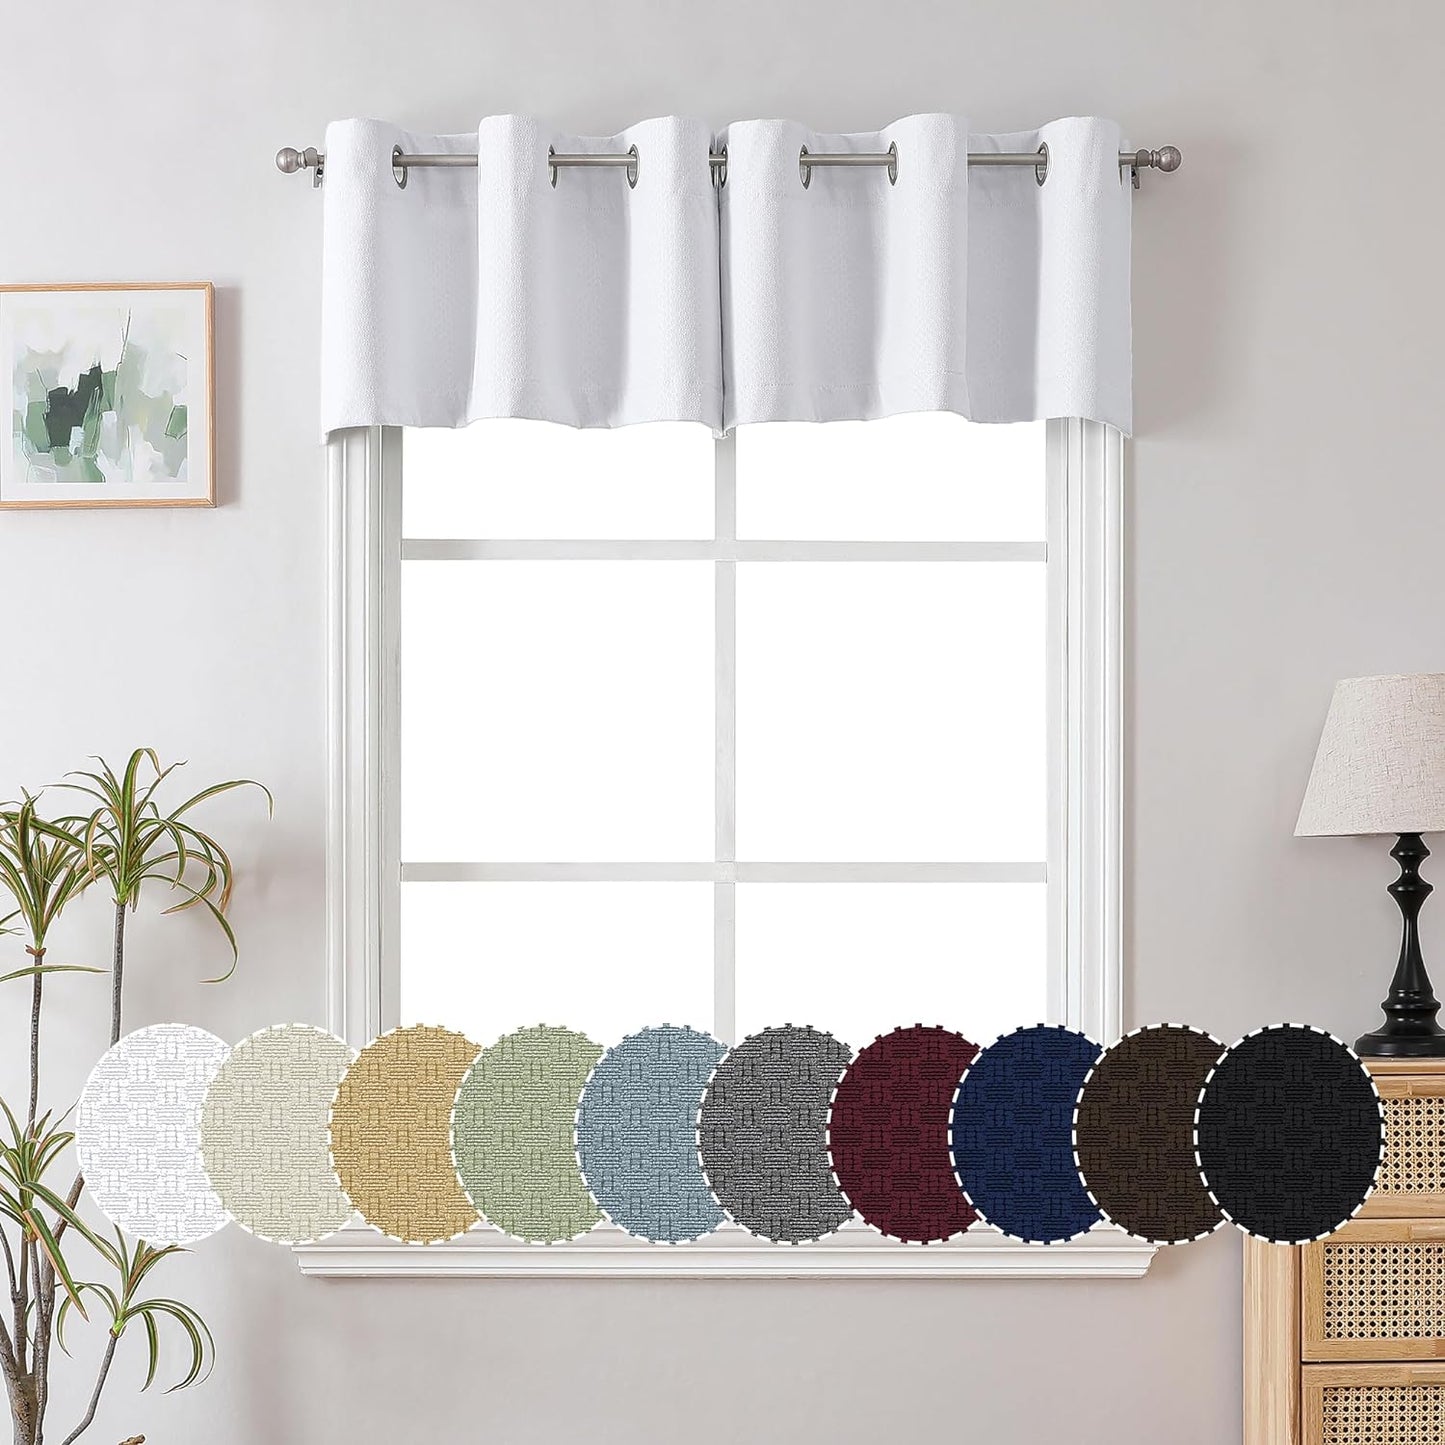 OVZME 100% Black Out Curtains 63 Inch Long 2 Panel Sets for Living Room, Completely Blackout Bedroom Drapes Textured Thermal Insulated Warm Fleece for Winter, Grommet Top, 42W X 63L, Sky Blue  OVZME White 42W X 14L Inch X 2 Panels 